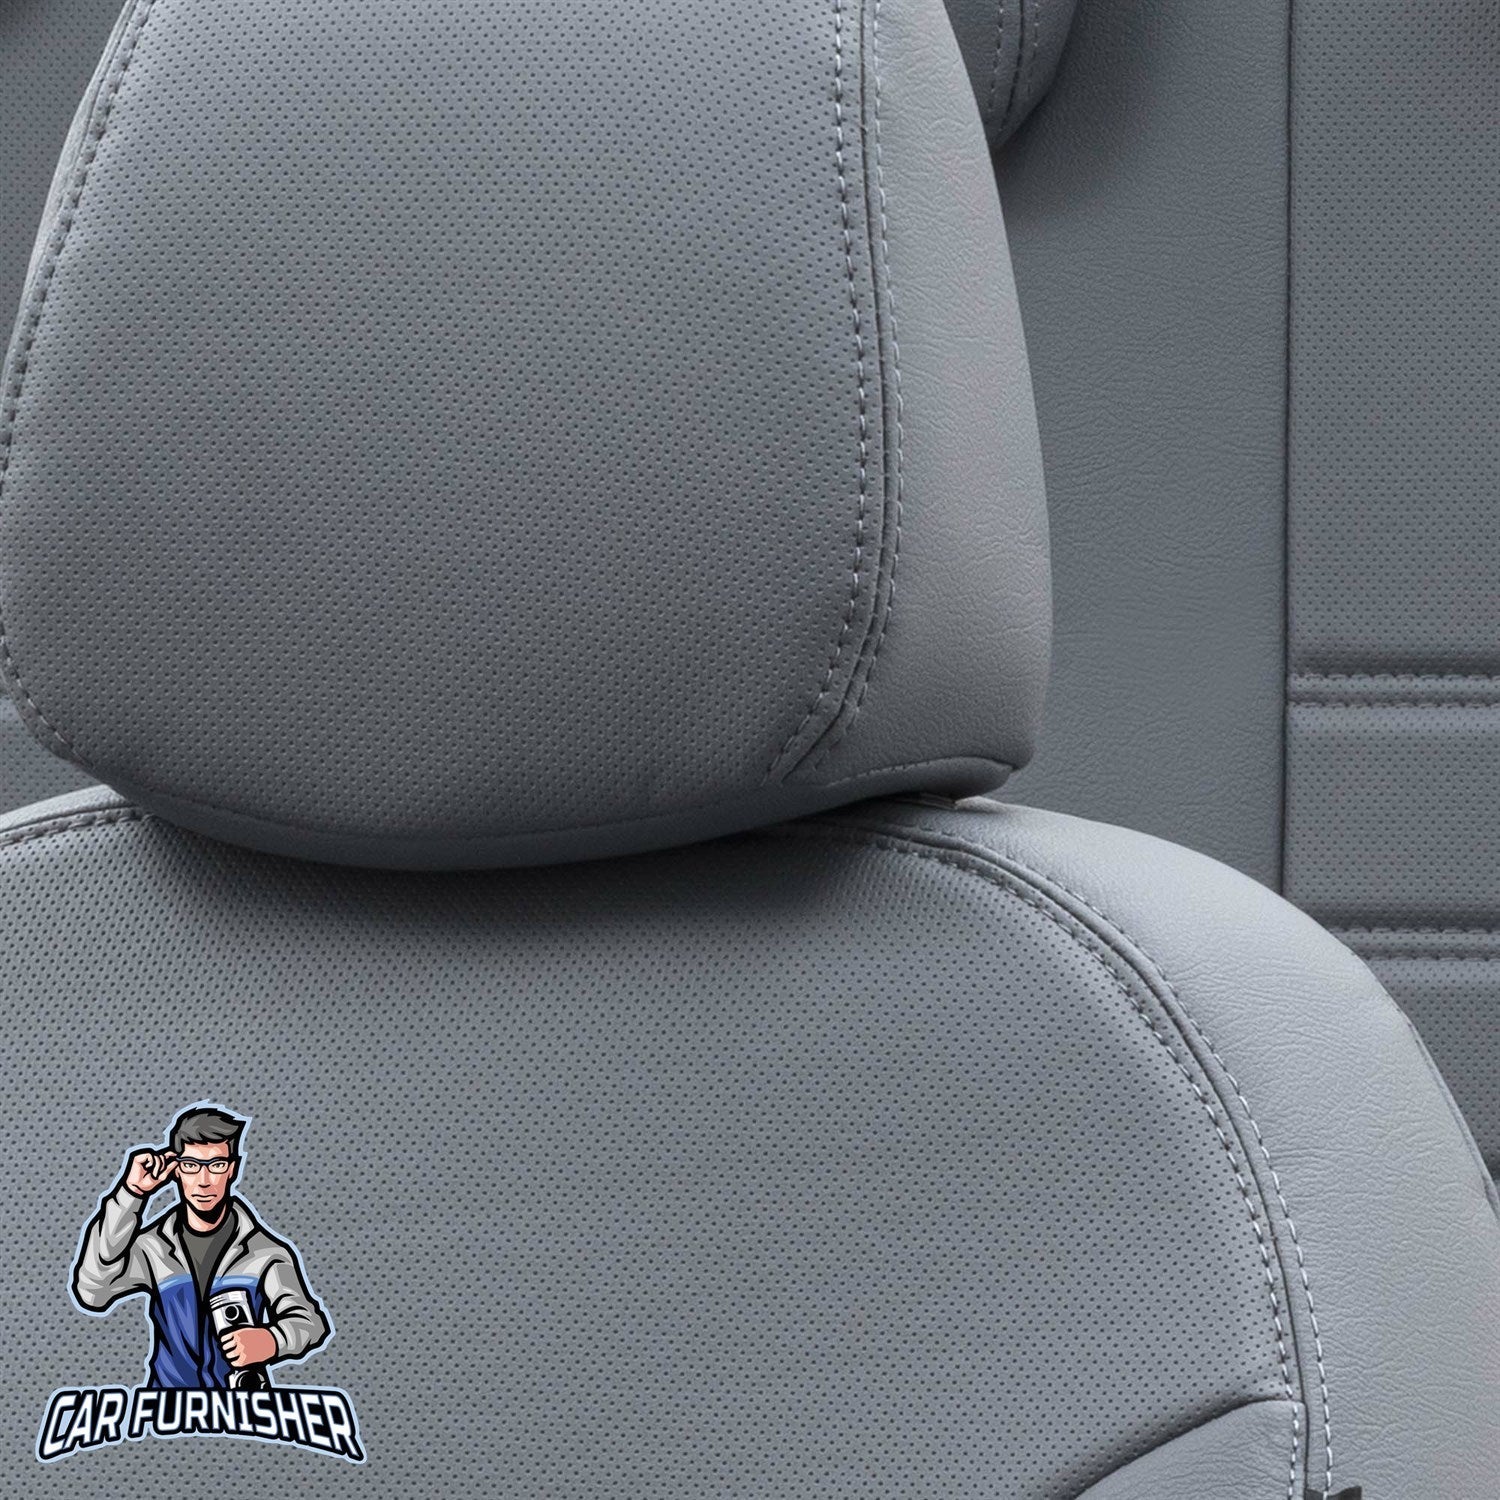 Skoda Fabia Seat Covers Istanbul Leather Design Smoked Leather